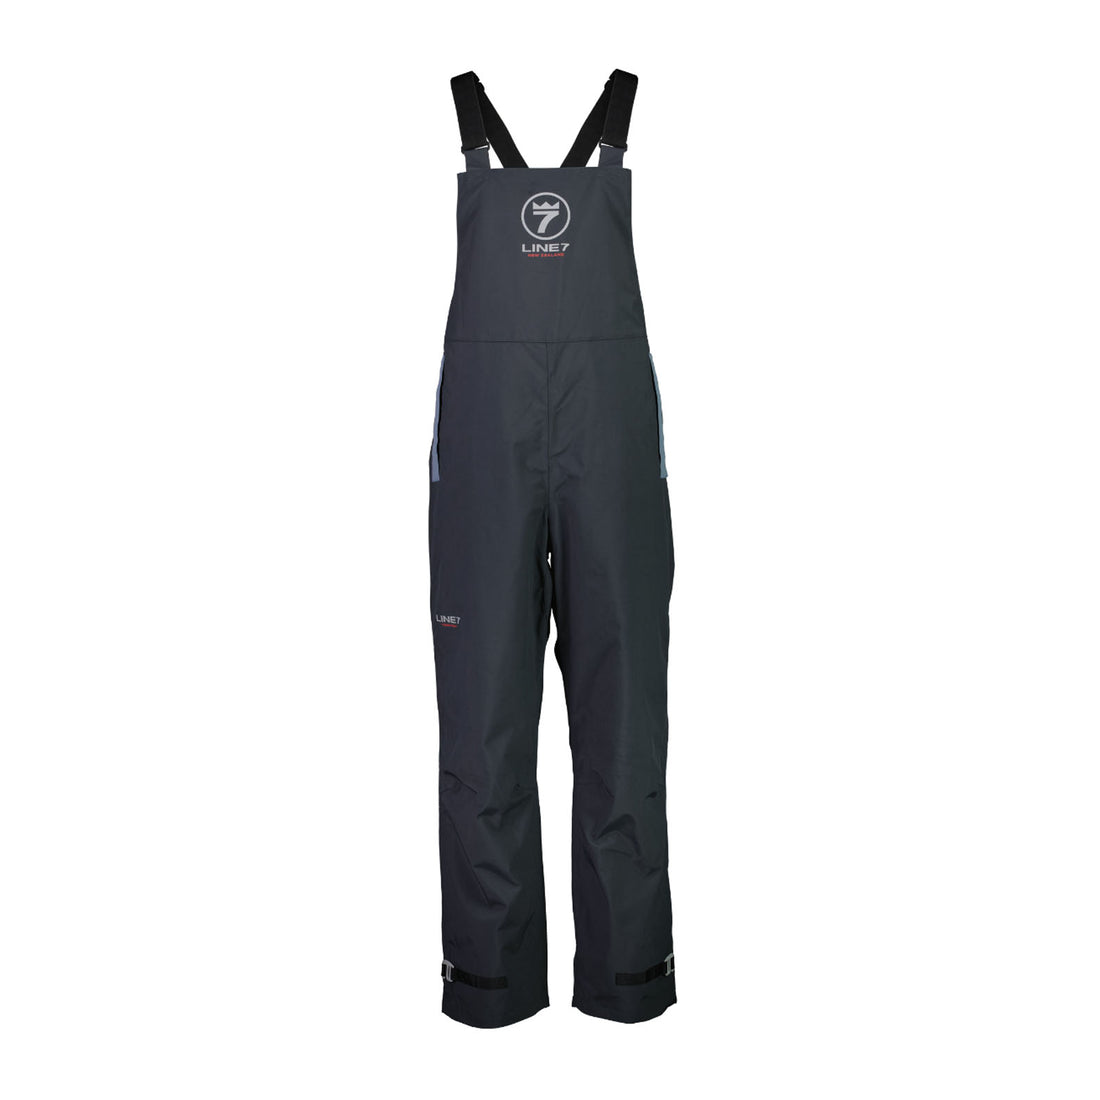 Line 7 Storm Armour10 Waterproof 2 Layer Bib Overtrousers